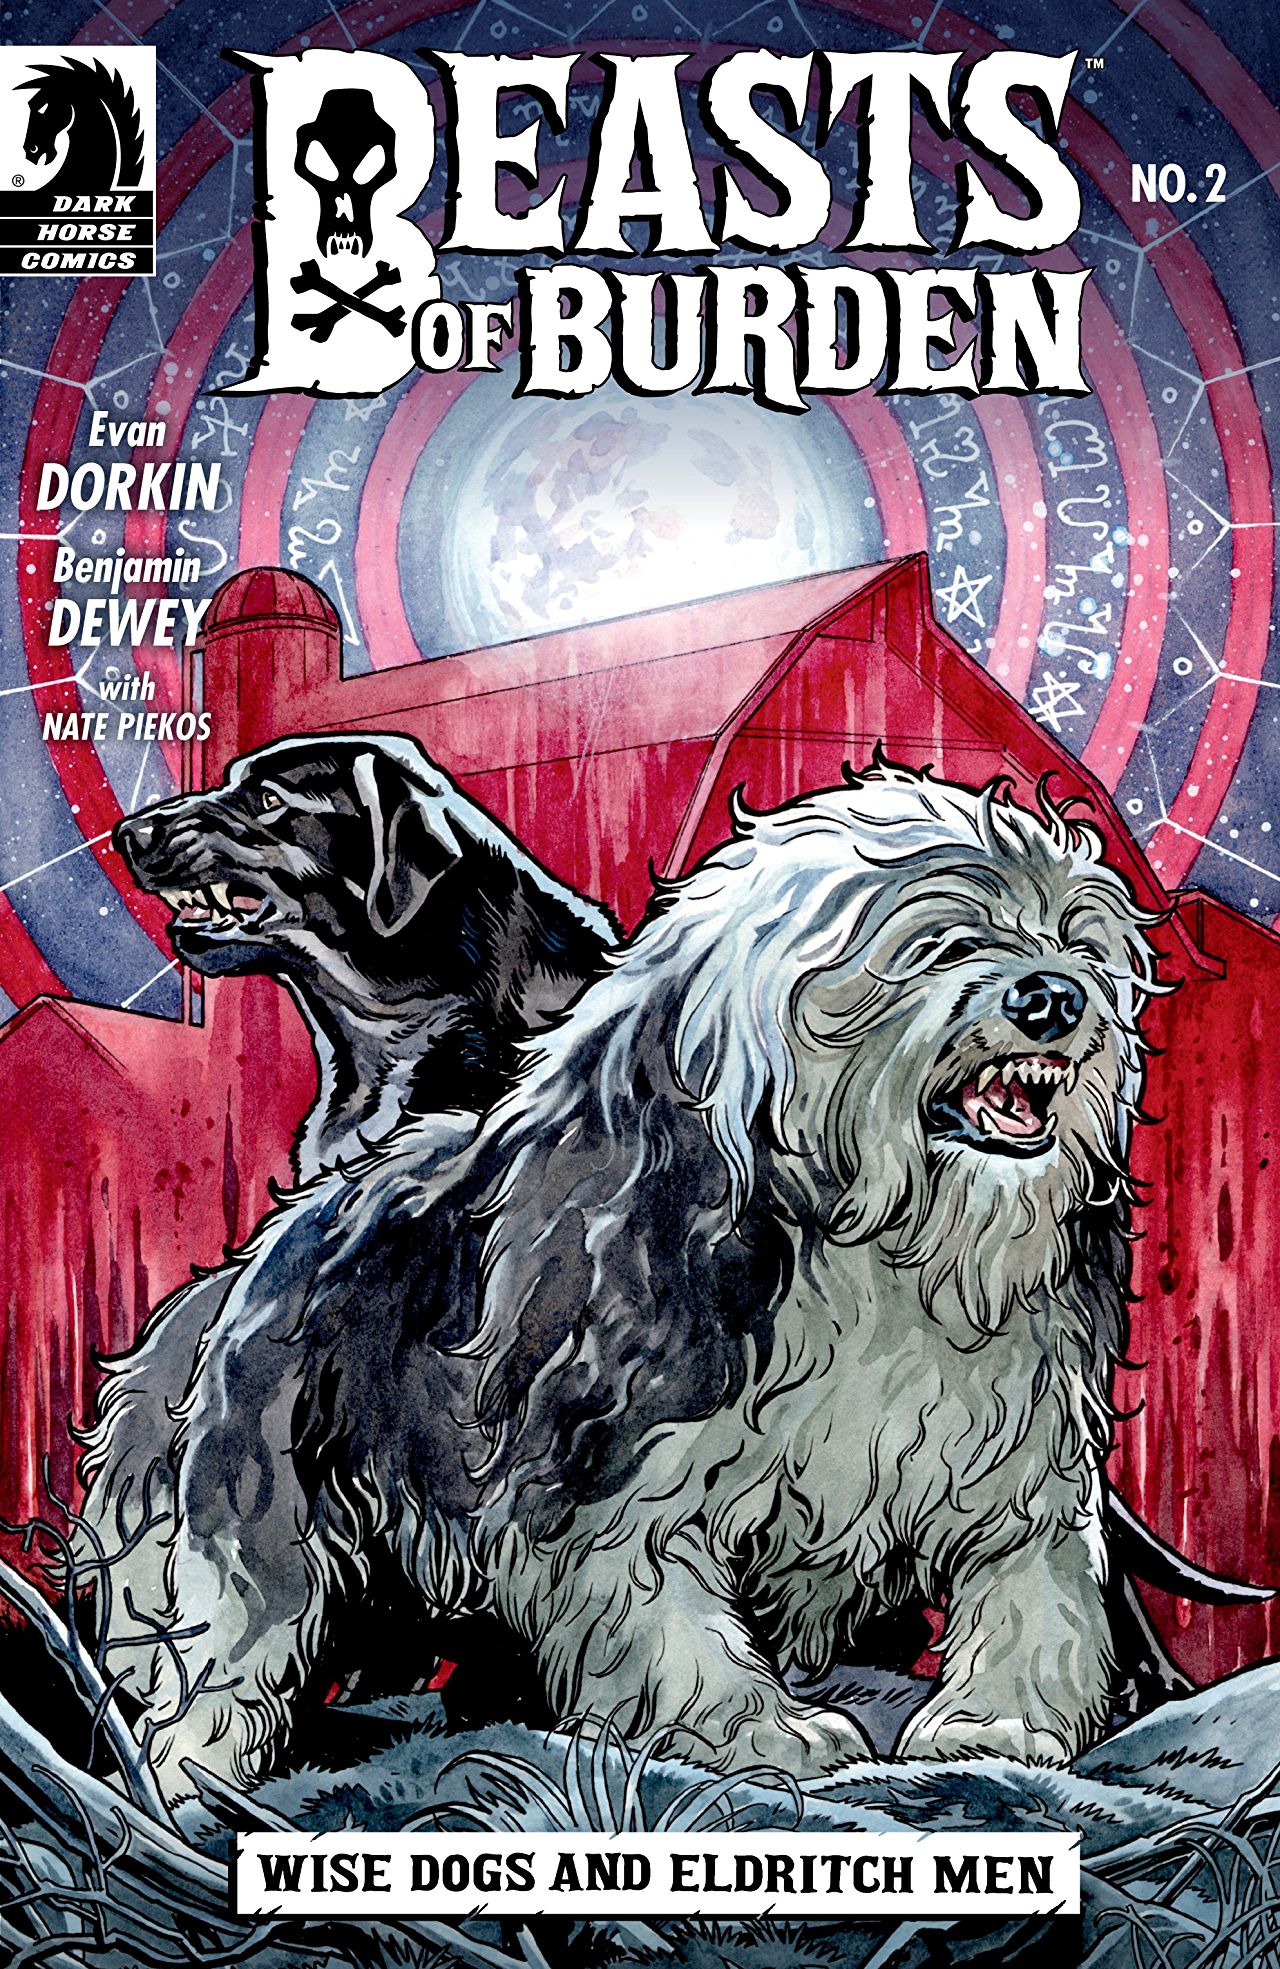 Beasts of Burden: Wise Dogs and Eldritch Men #2 Review